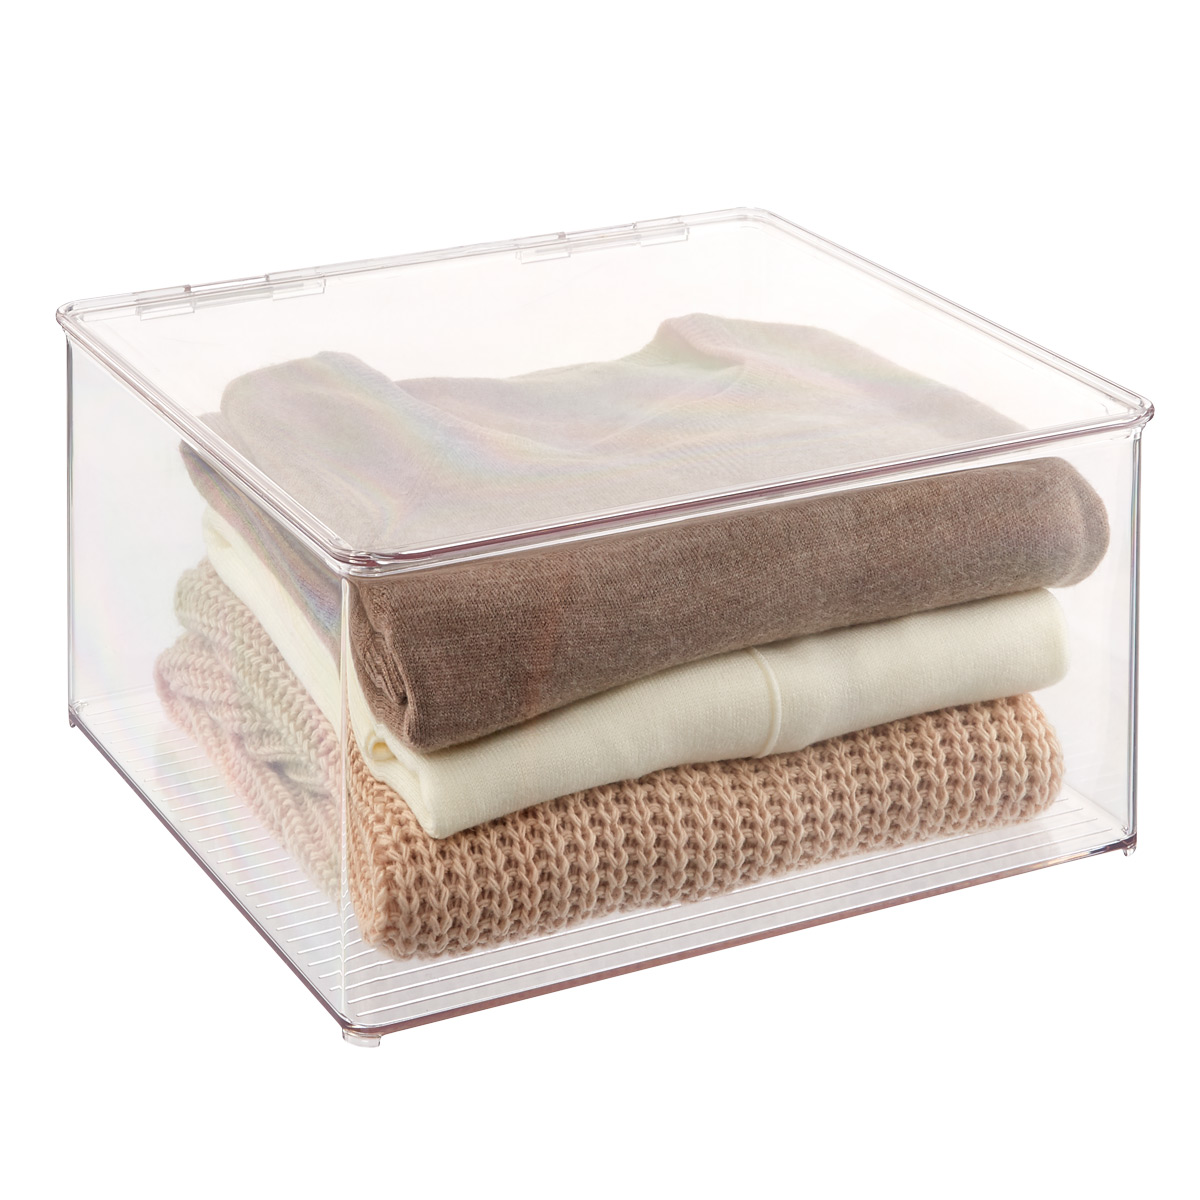 https://www.containerstore.com/catalogimages/403398/10083366-Hinged-Lid-Stackable-Sweate.jpg